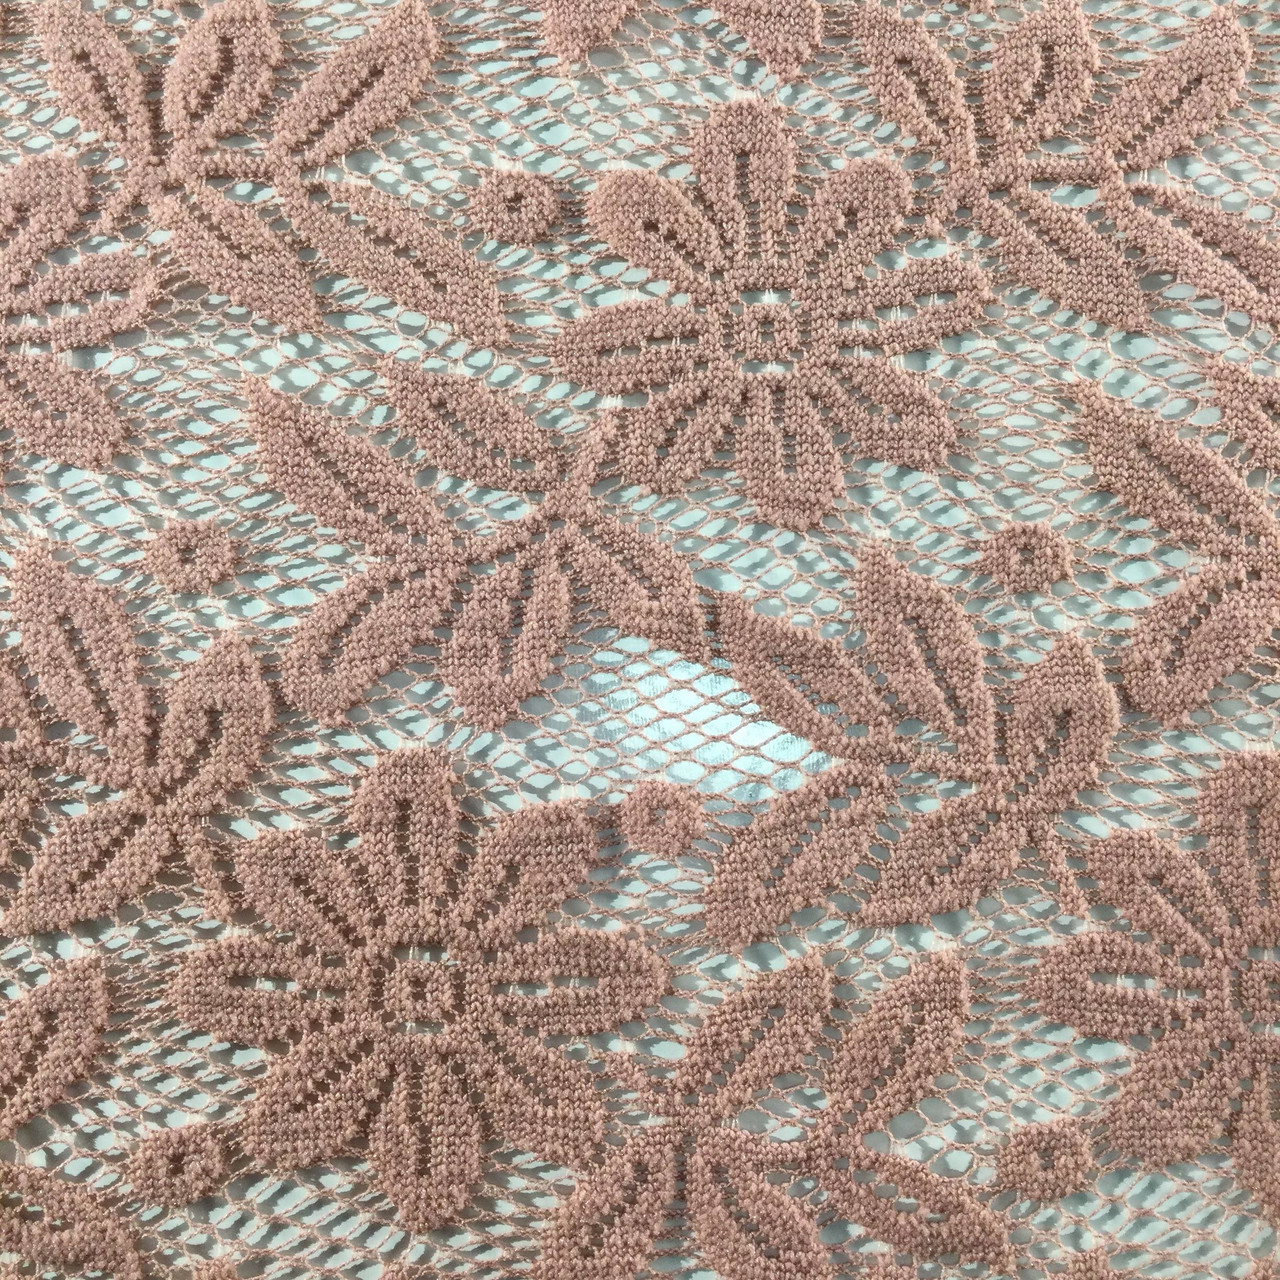 Dusky Pink Lace French 17 cm/6.75  – The Lace Co.